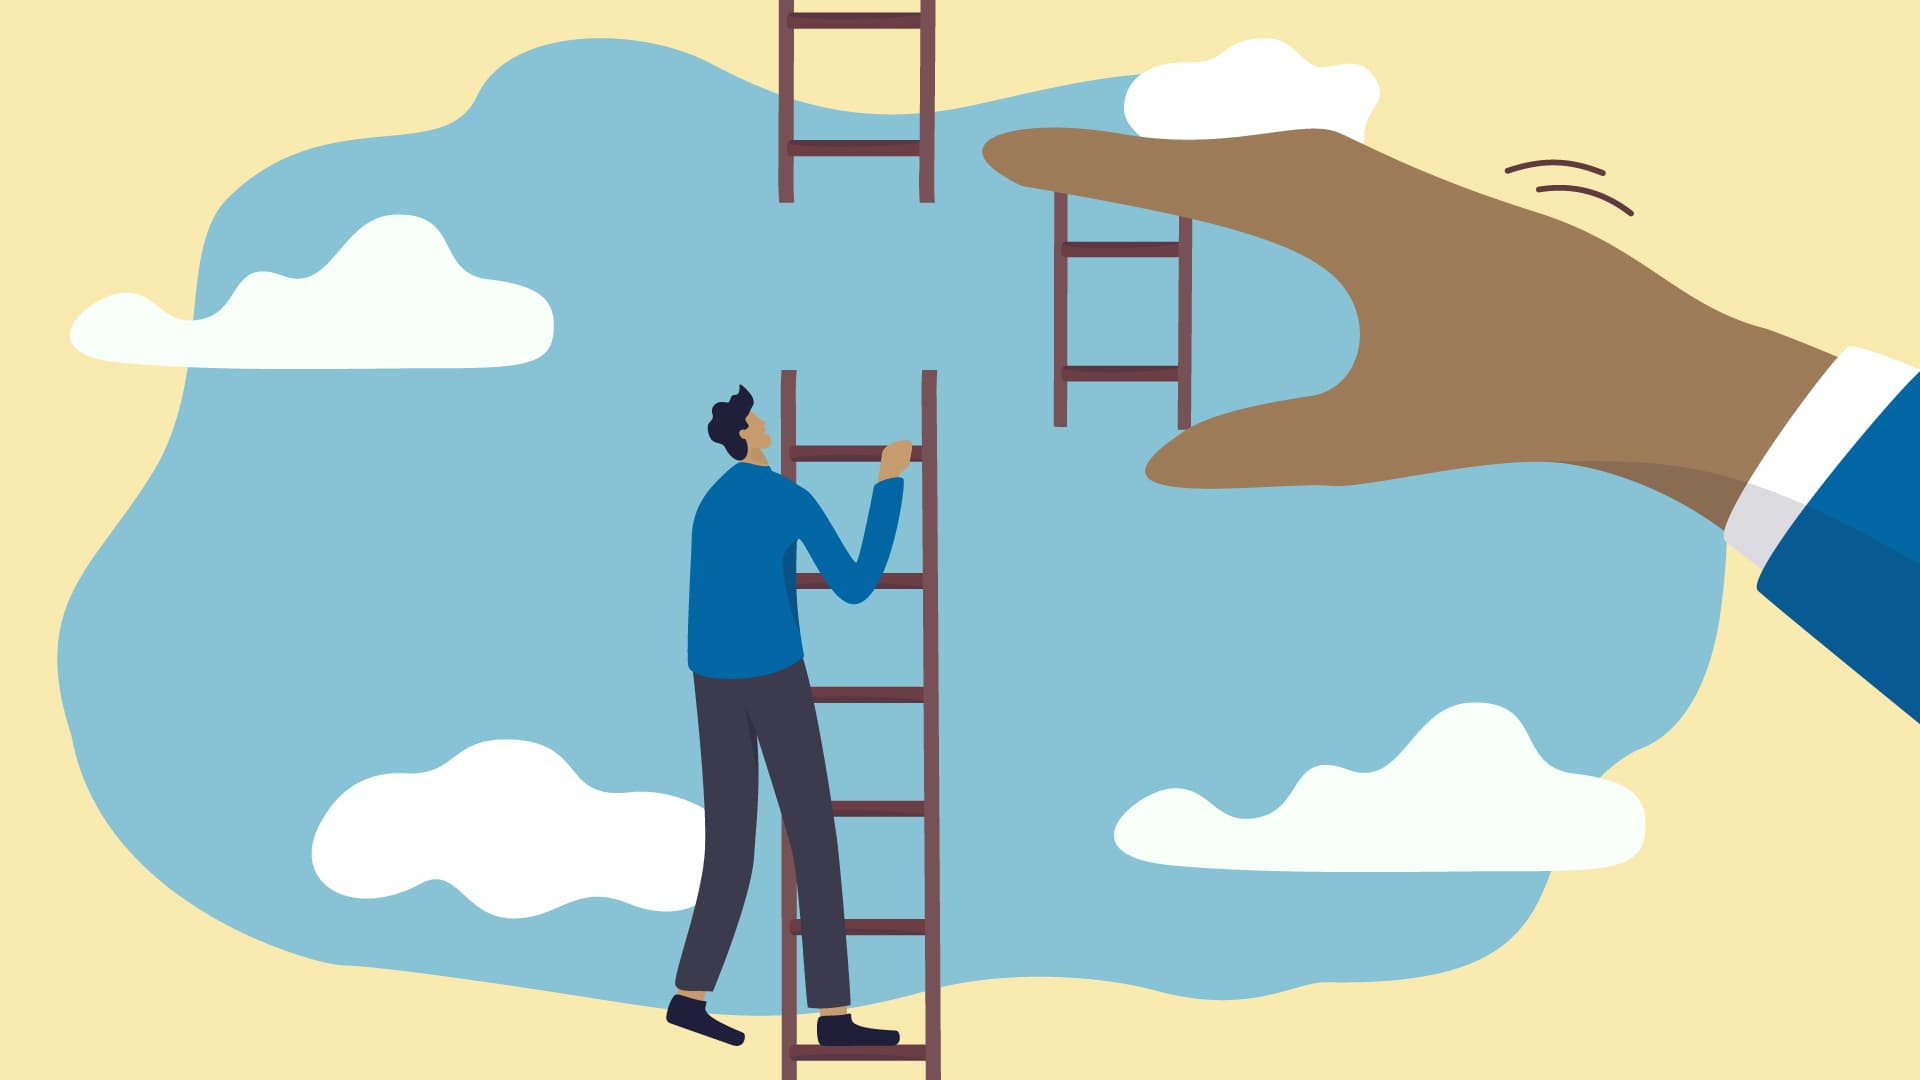 Illustration of person climbing broken ladder as a hand adds the missing piece